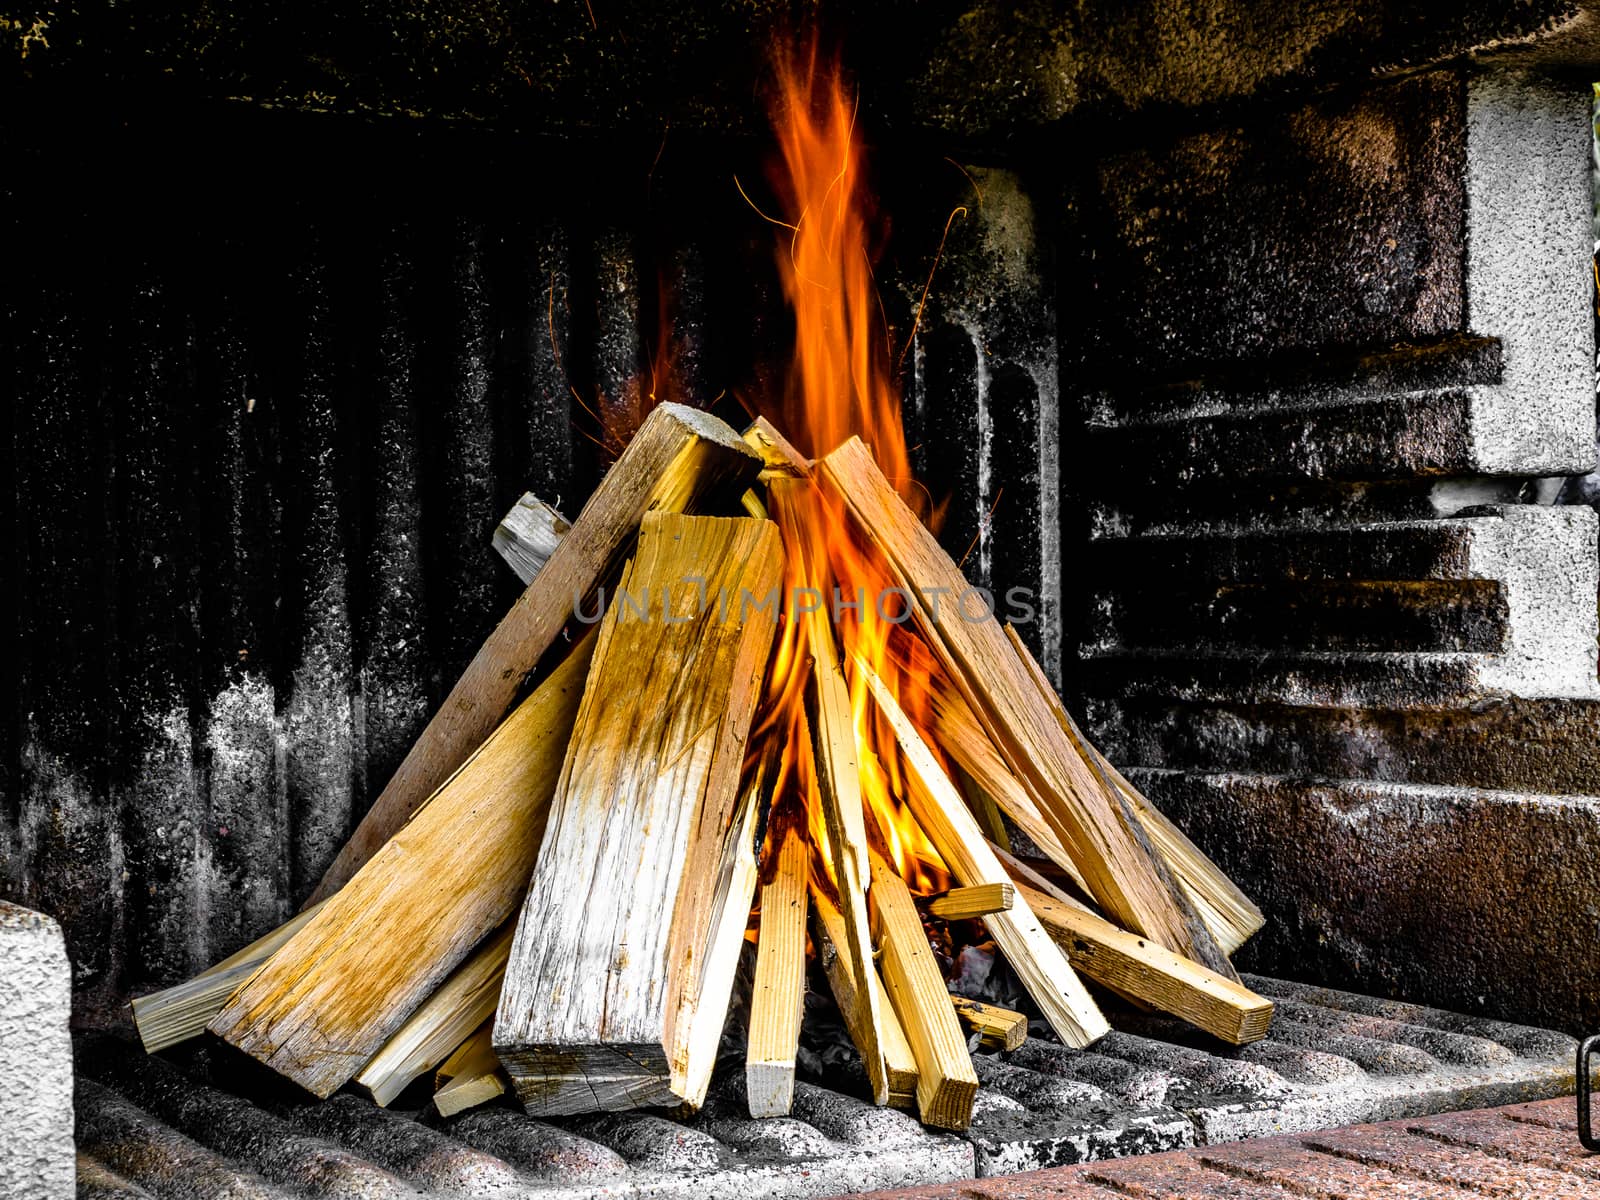 Preparation of a BBQ - wood piled up - flames on the right